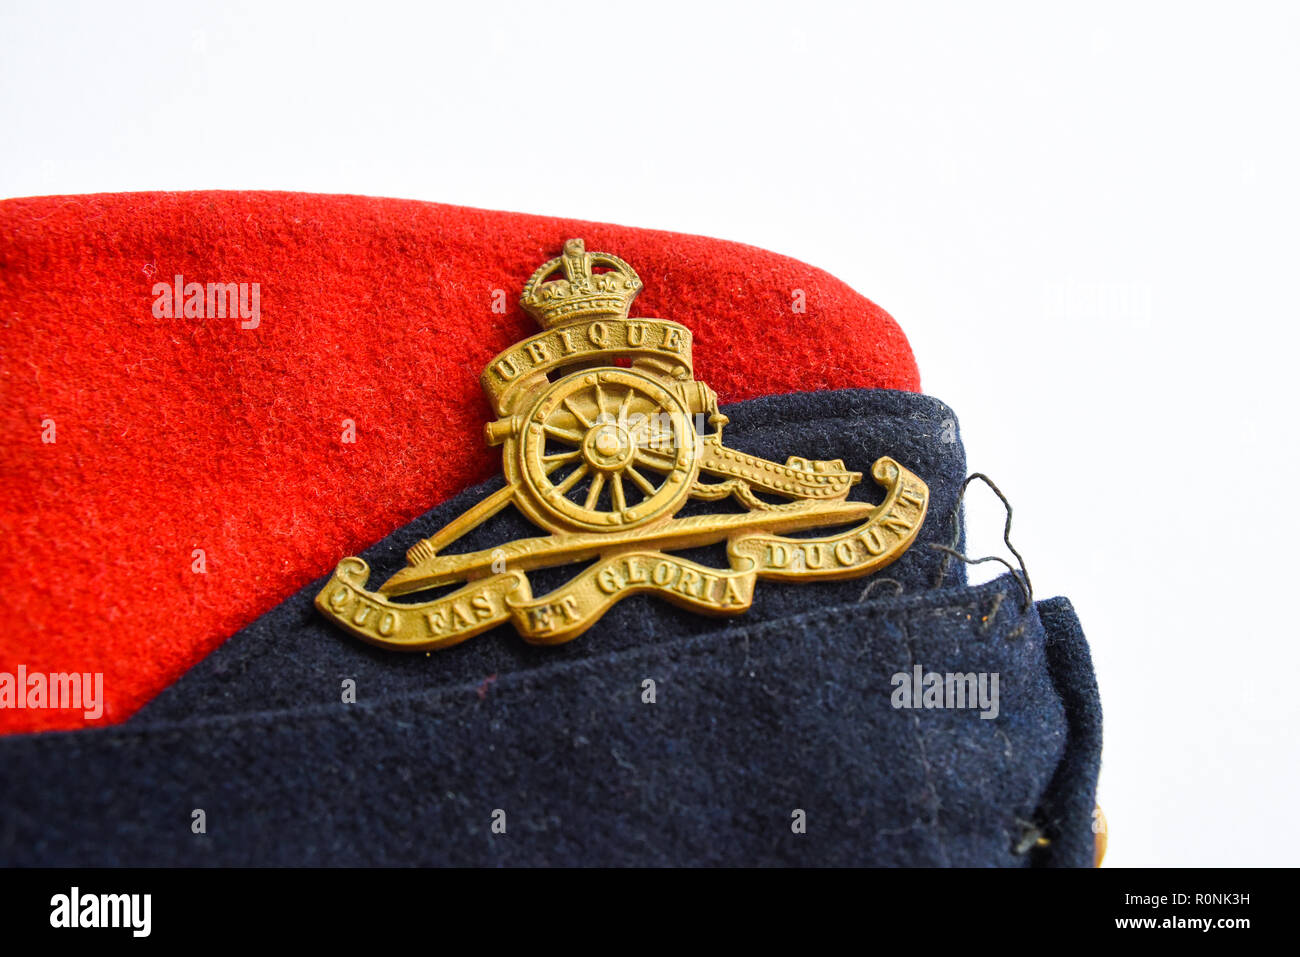 Second World War British Army Royal Artillery forage cap with badge and Latin motto, Ubique Quo Fas et Gloria Ducunt. Dress uniform red and blue Stock Photo